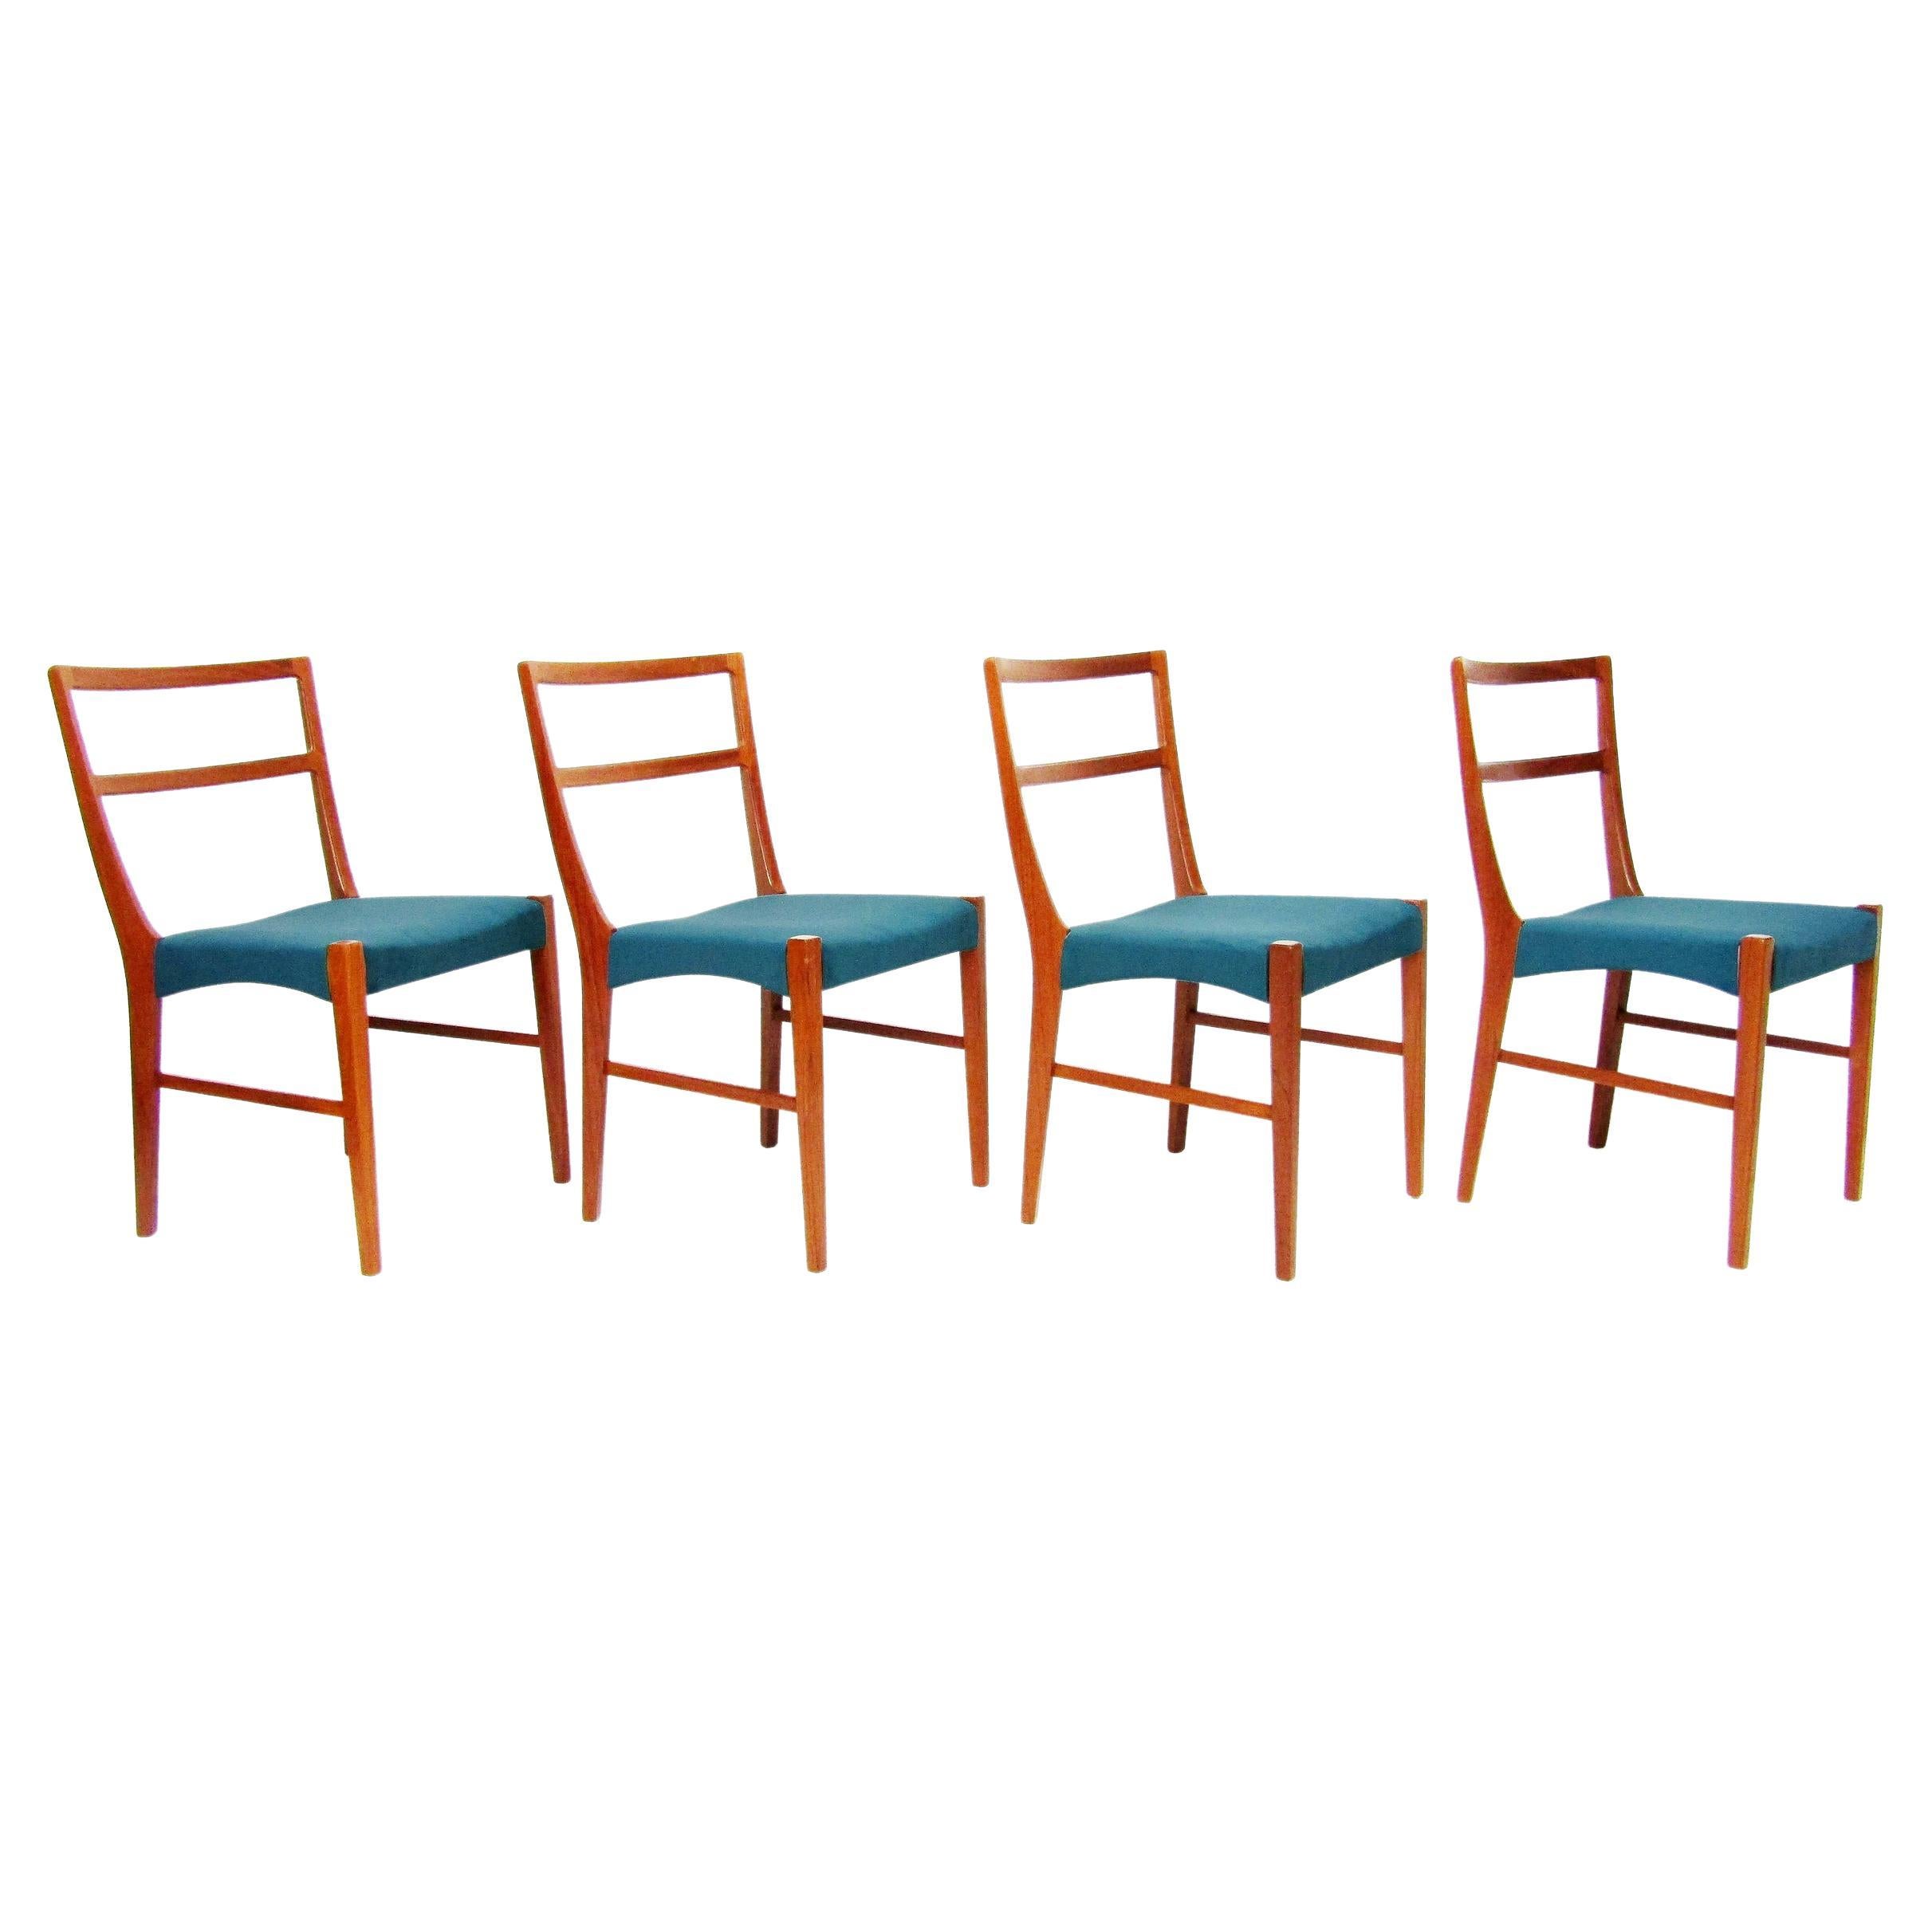 Four 1960s Danish Dining Chairs by Johannes Andersen for Bernhard Pedersen For Sale